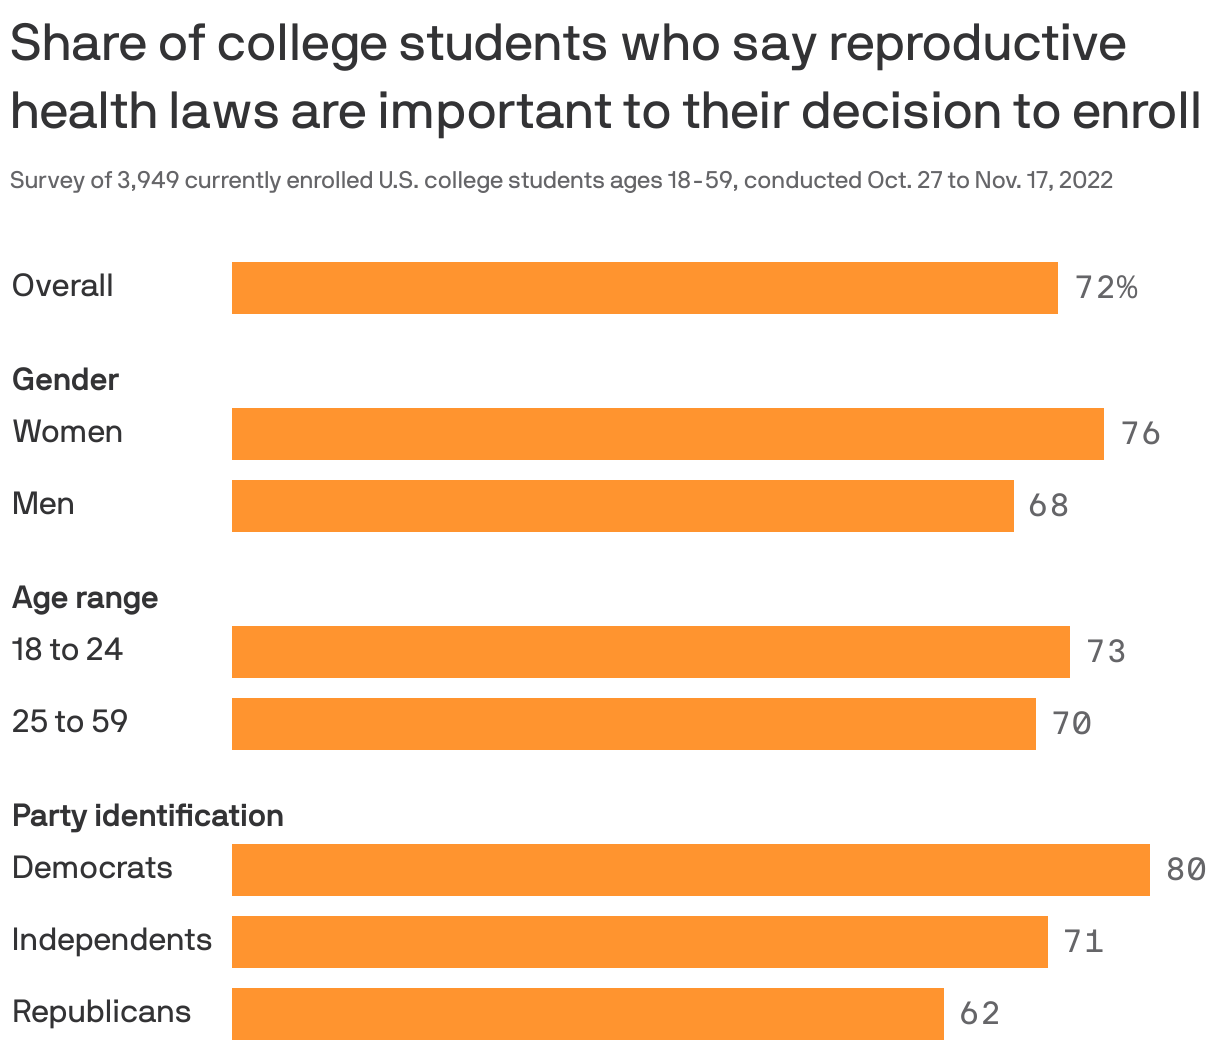 Share of college students who say reproductive health laws are important to their decision to enroll